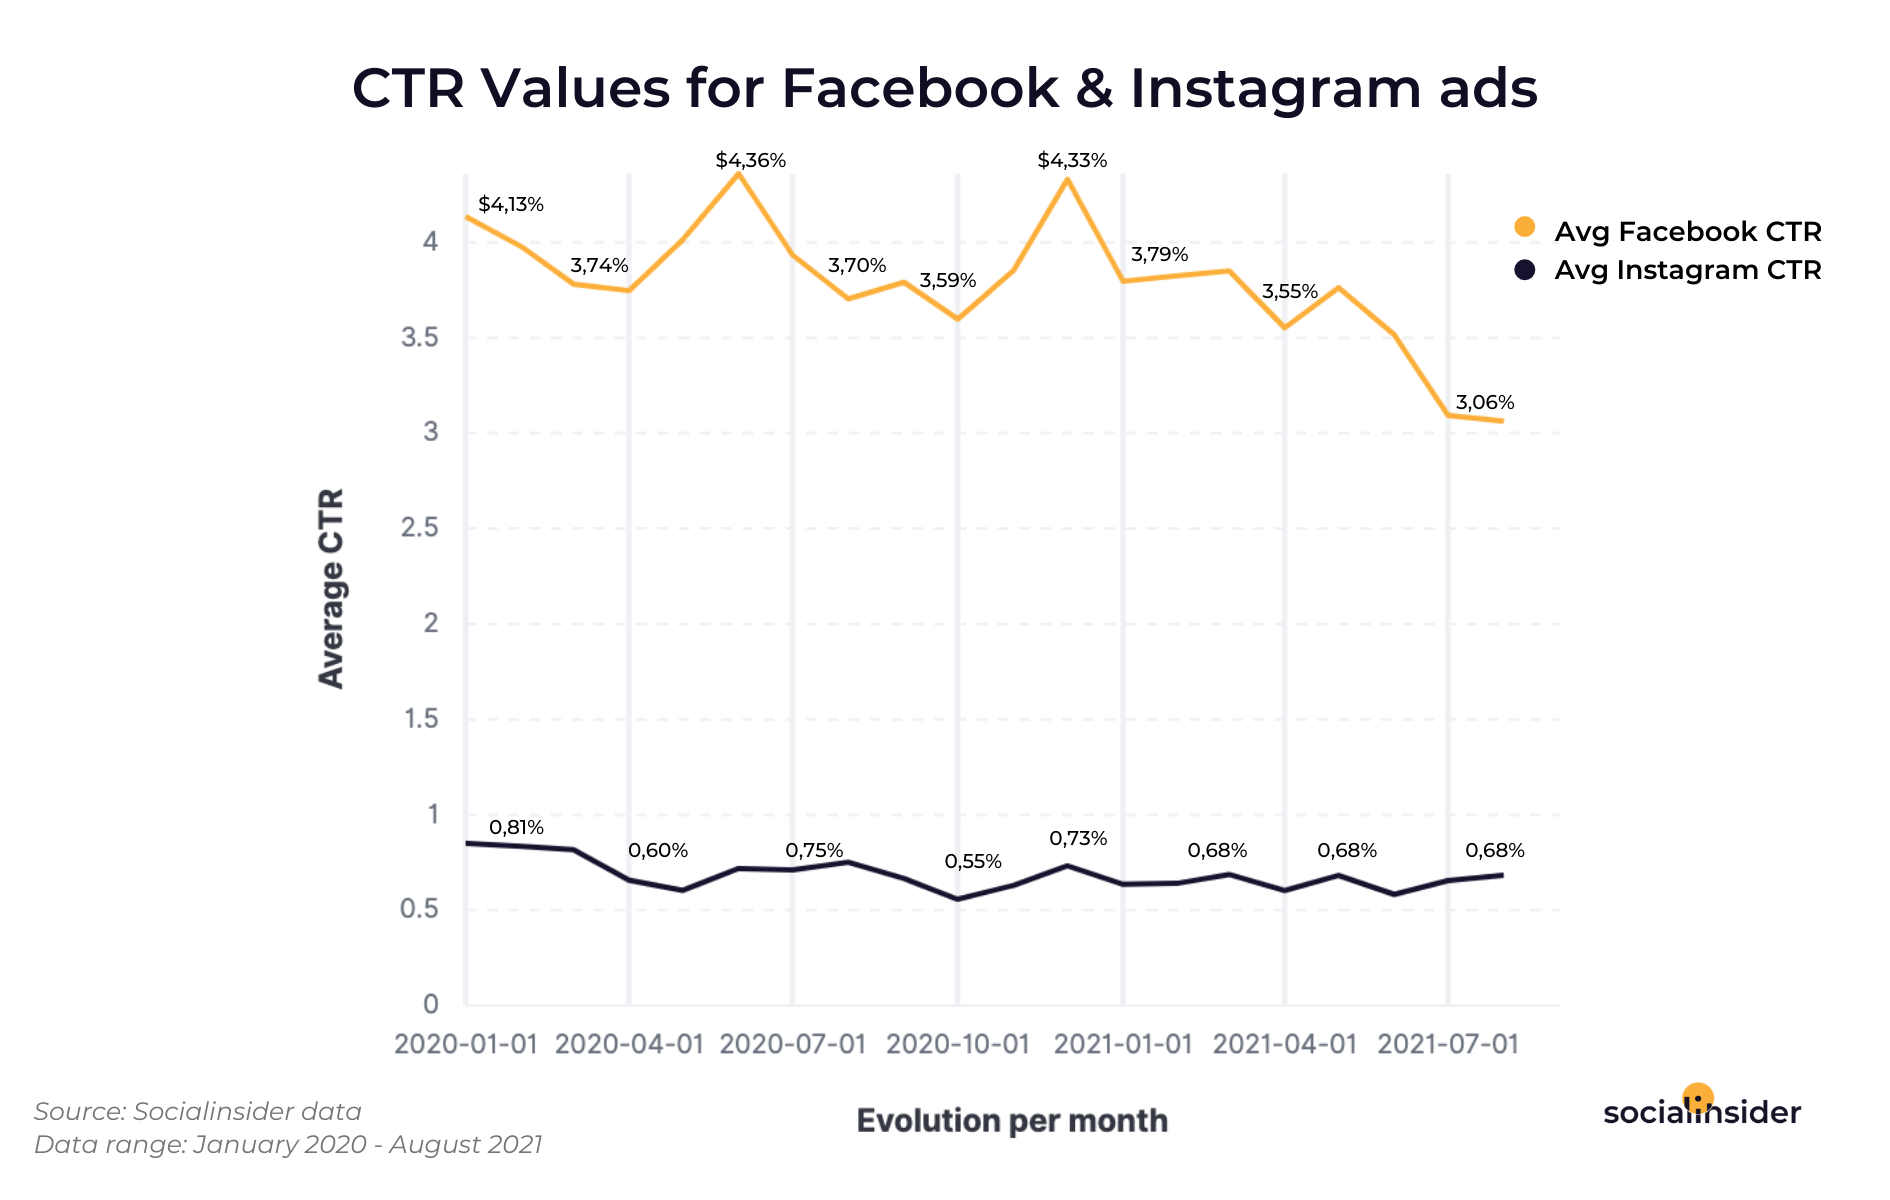 These are the average CTR values for the click-through-rate evolution of Facebook and Instagram ads.